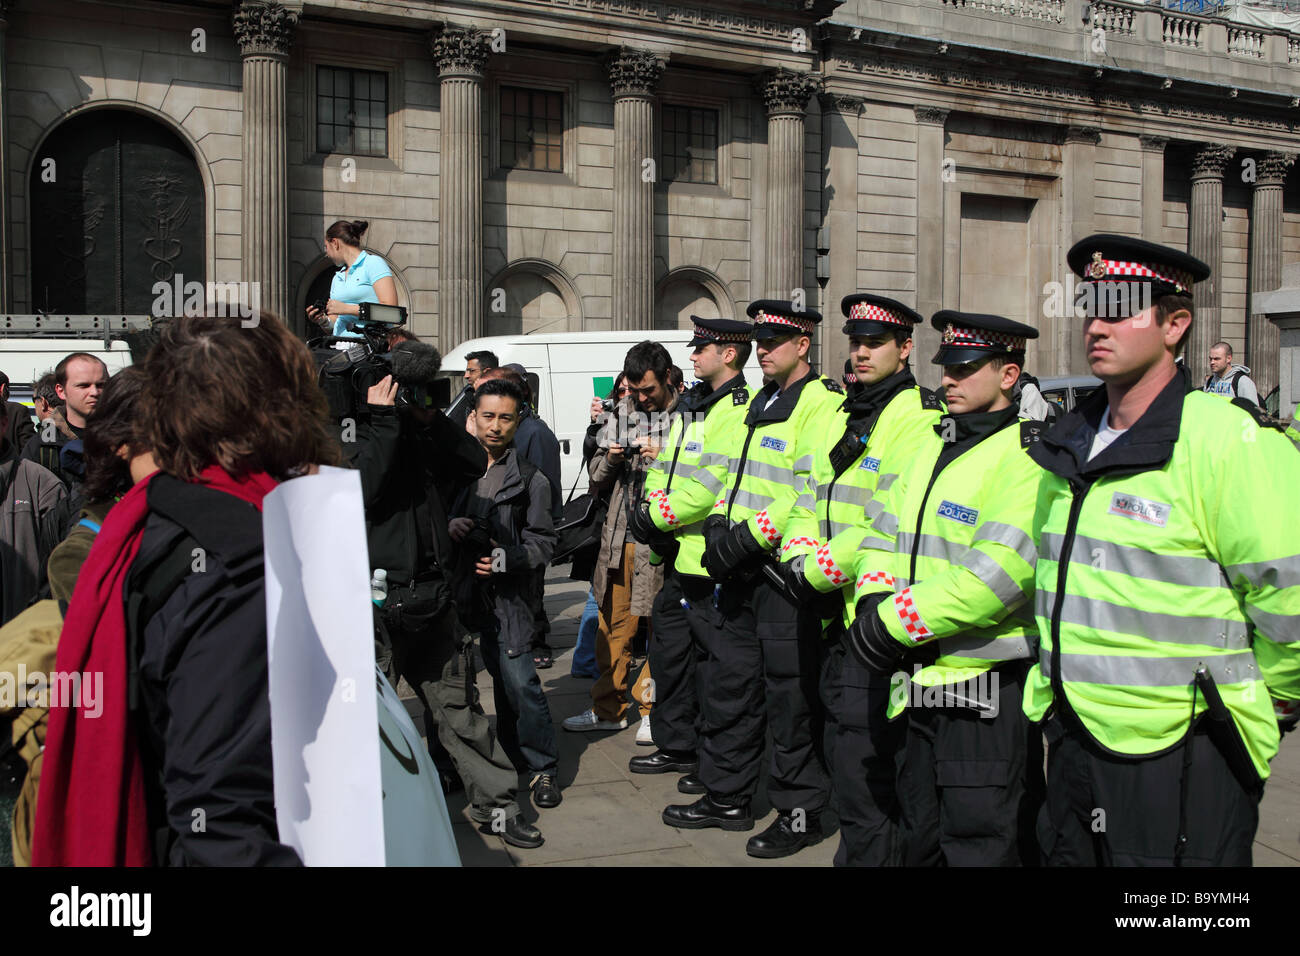 Protesters and police outside the Bank of England during the 2009 G20 summit, London, UK. Stock Photo